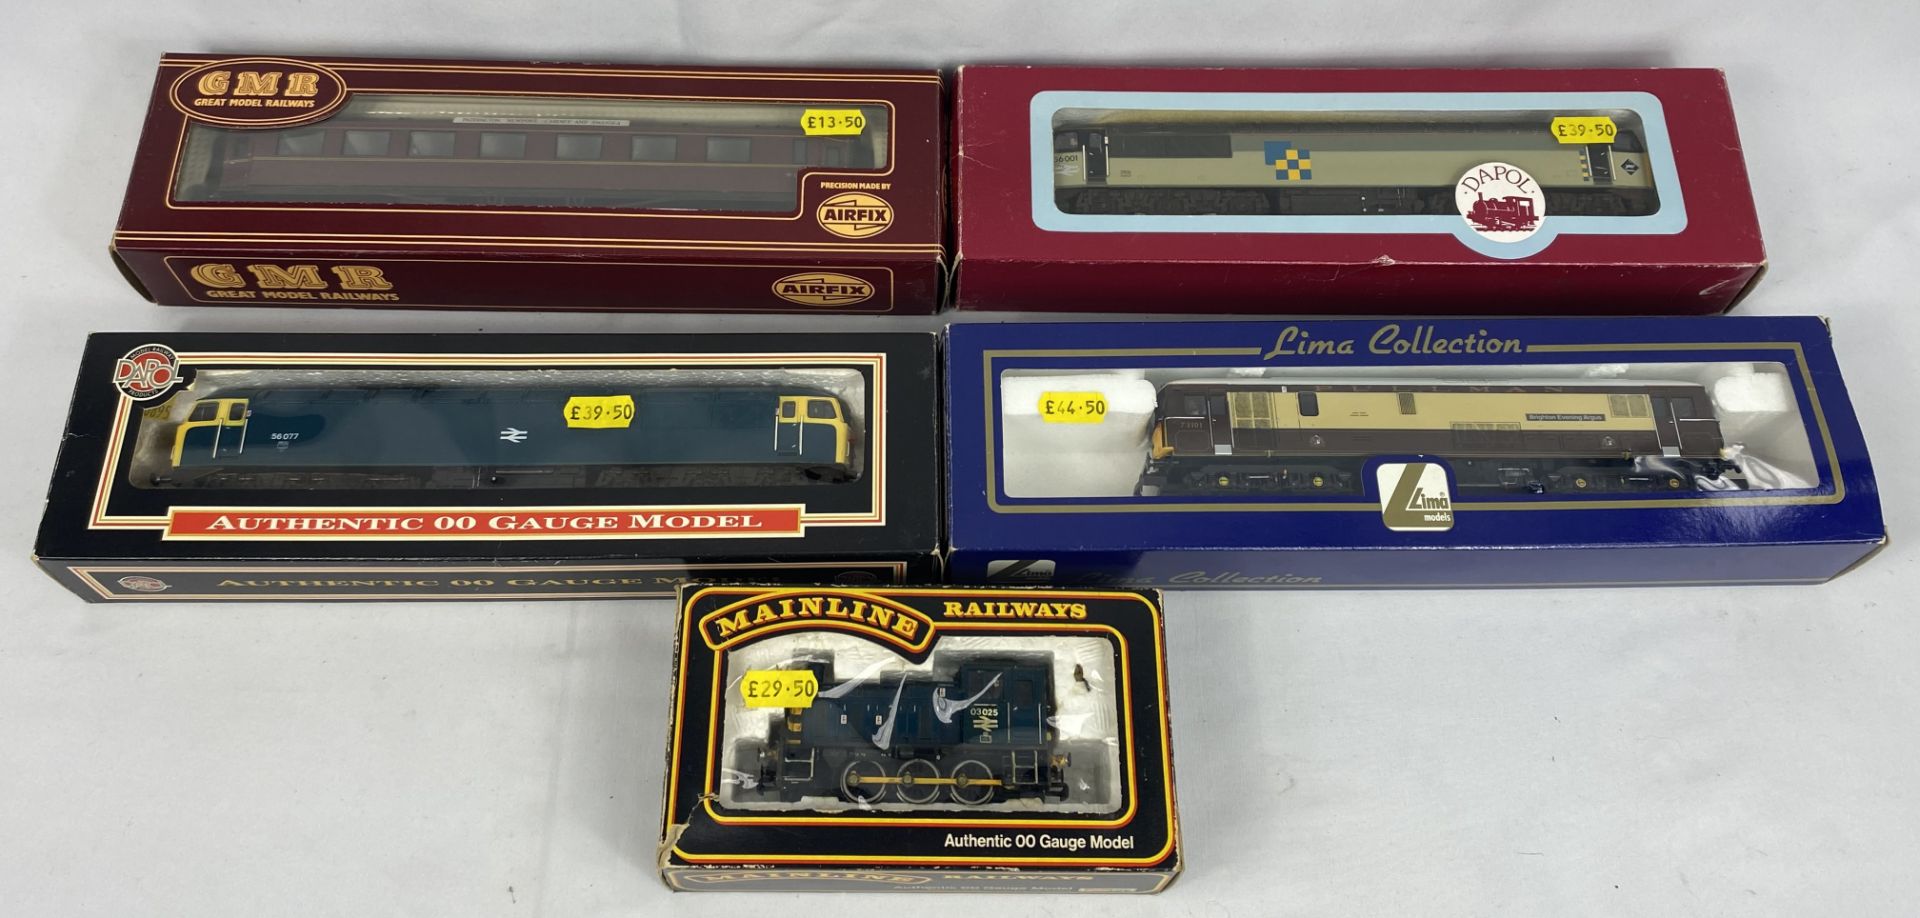 Three boxed 00 gauge diesel locomotives and other items - Image 7 of 7